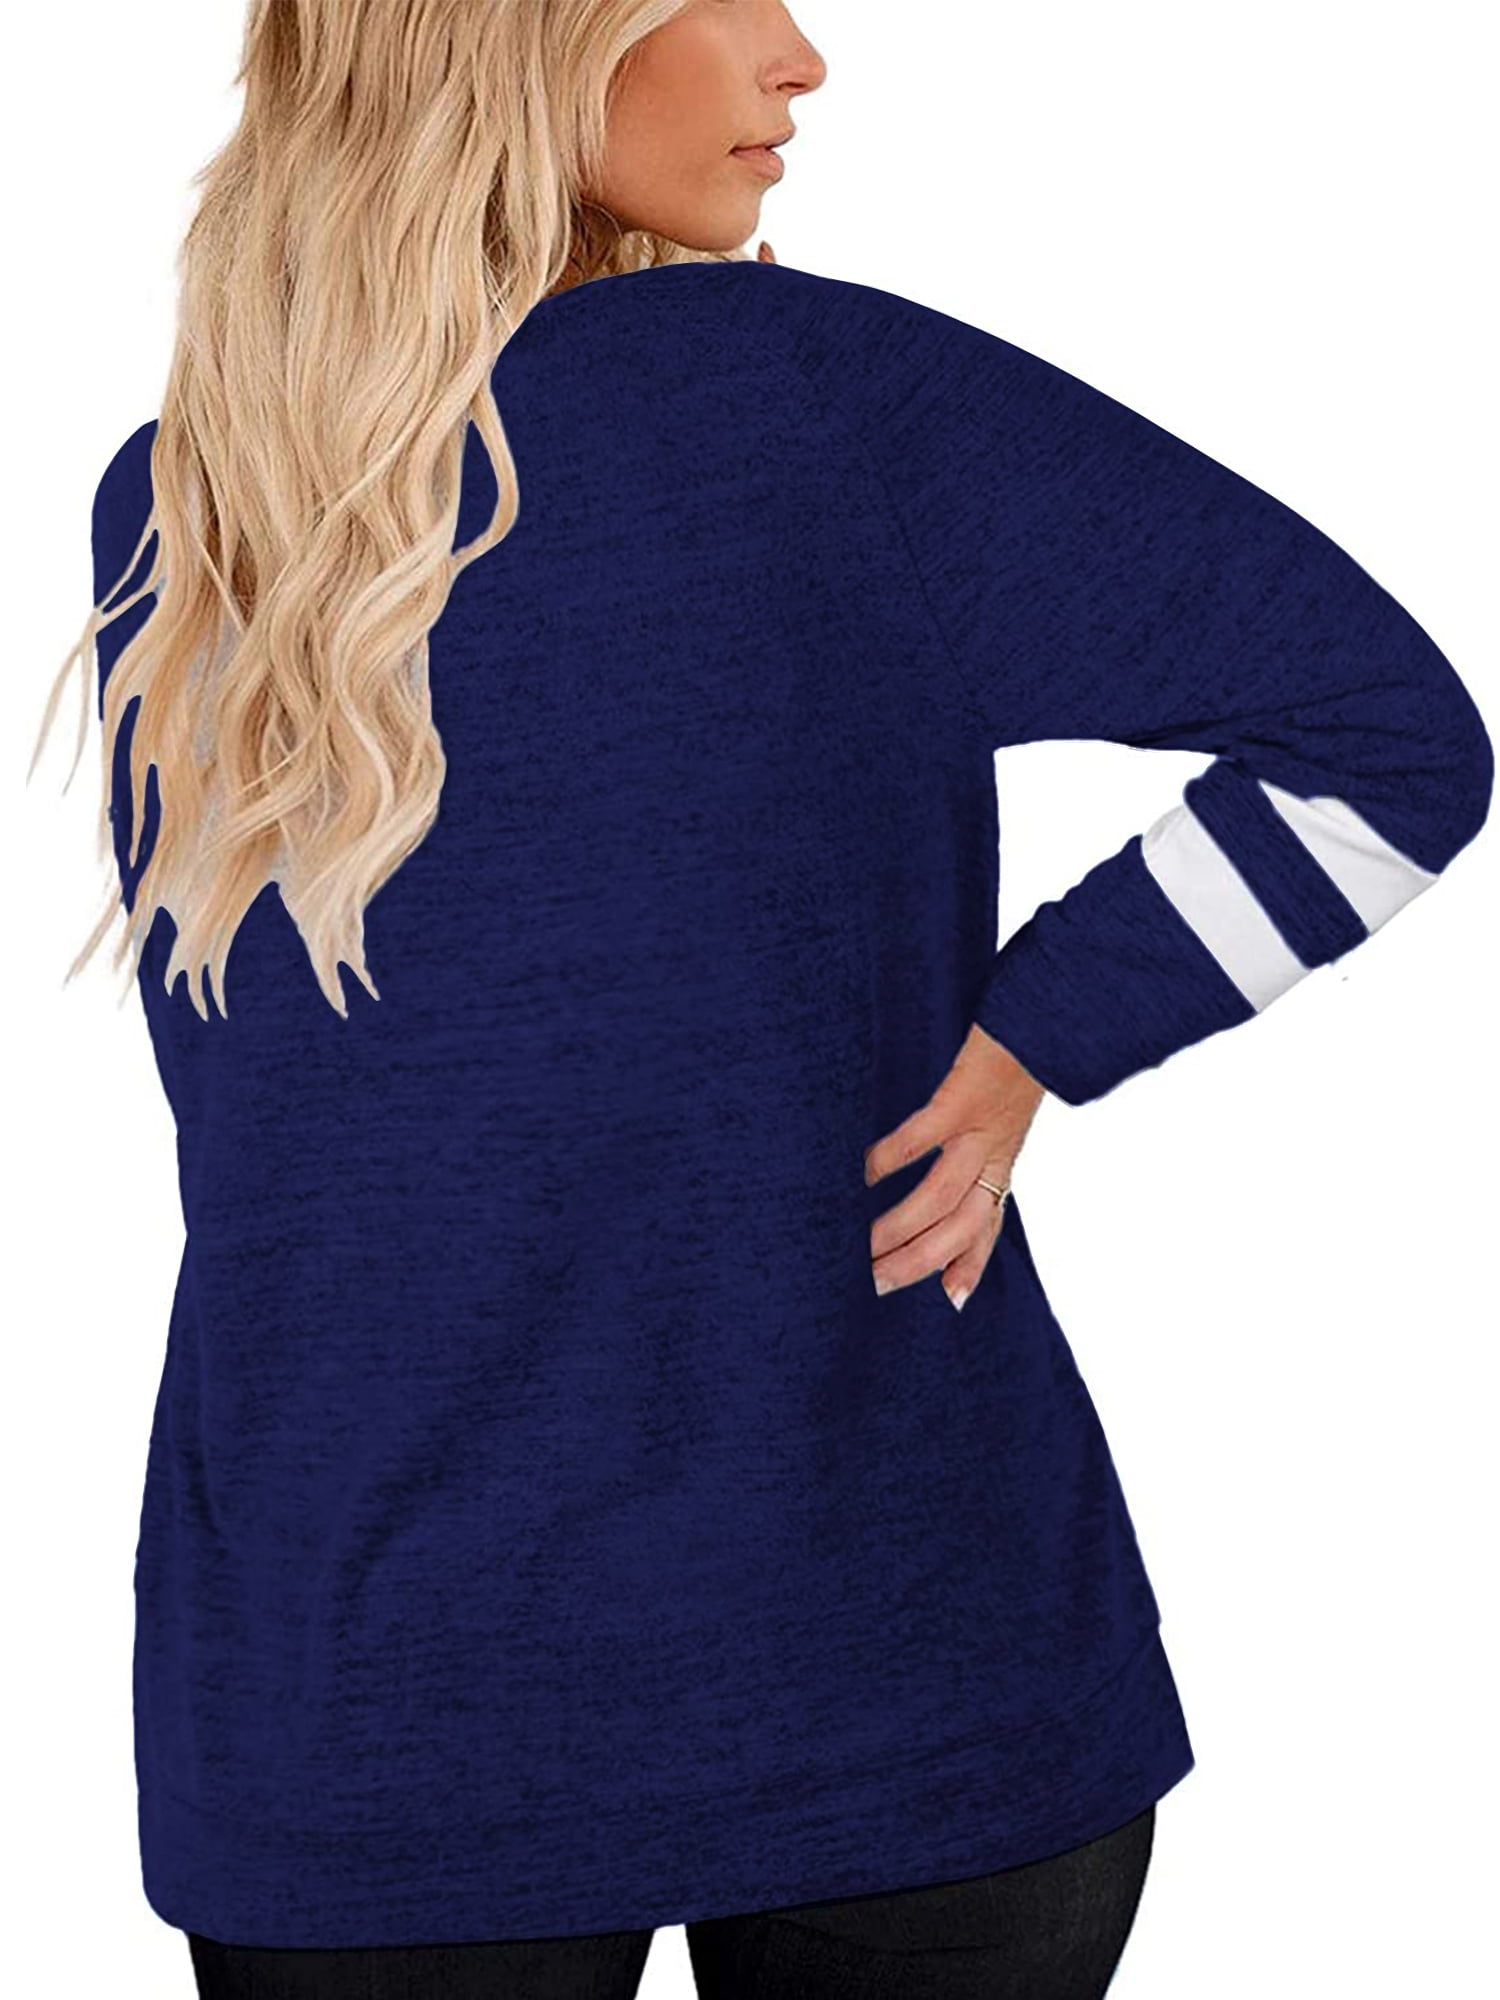 Women's Plus Size T Shirts Long Sleeve Color Block Tops Casual